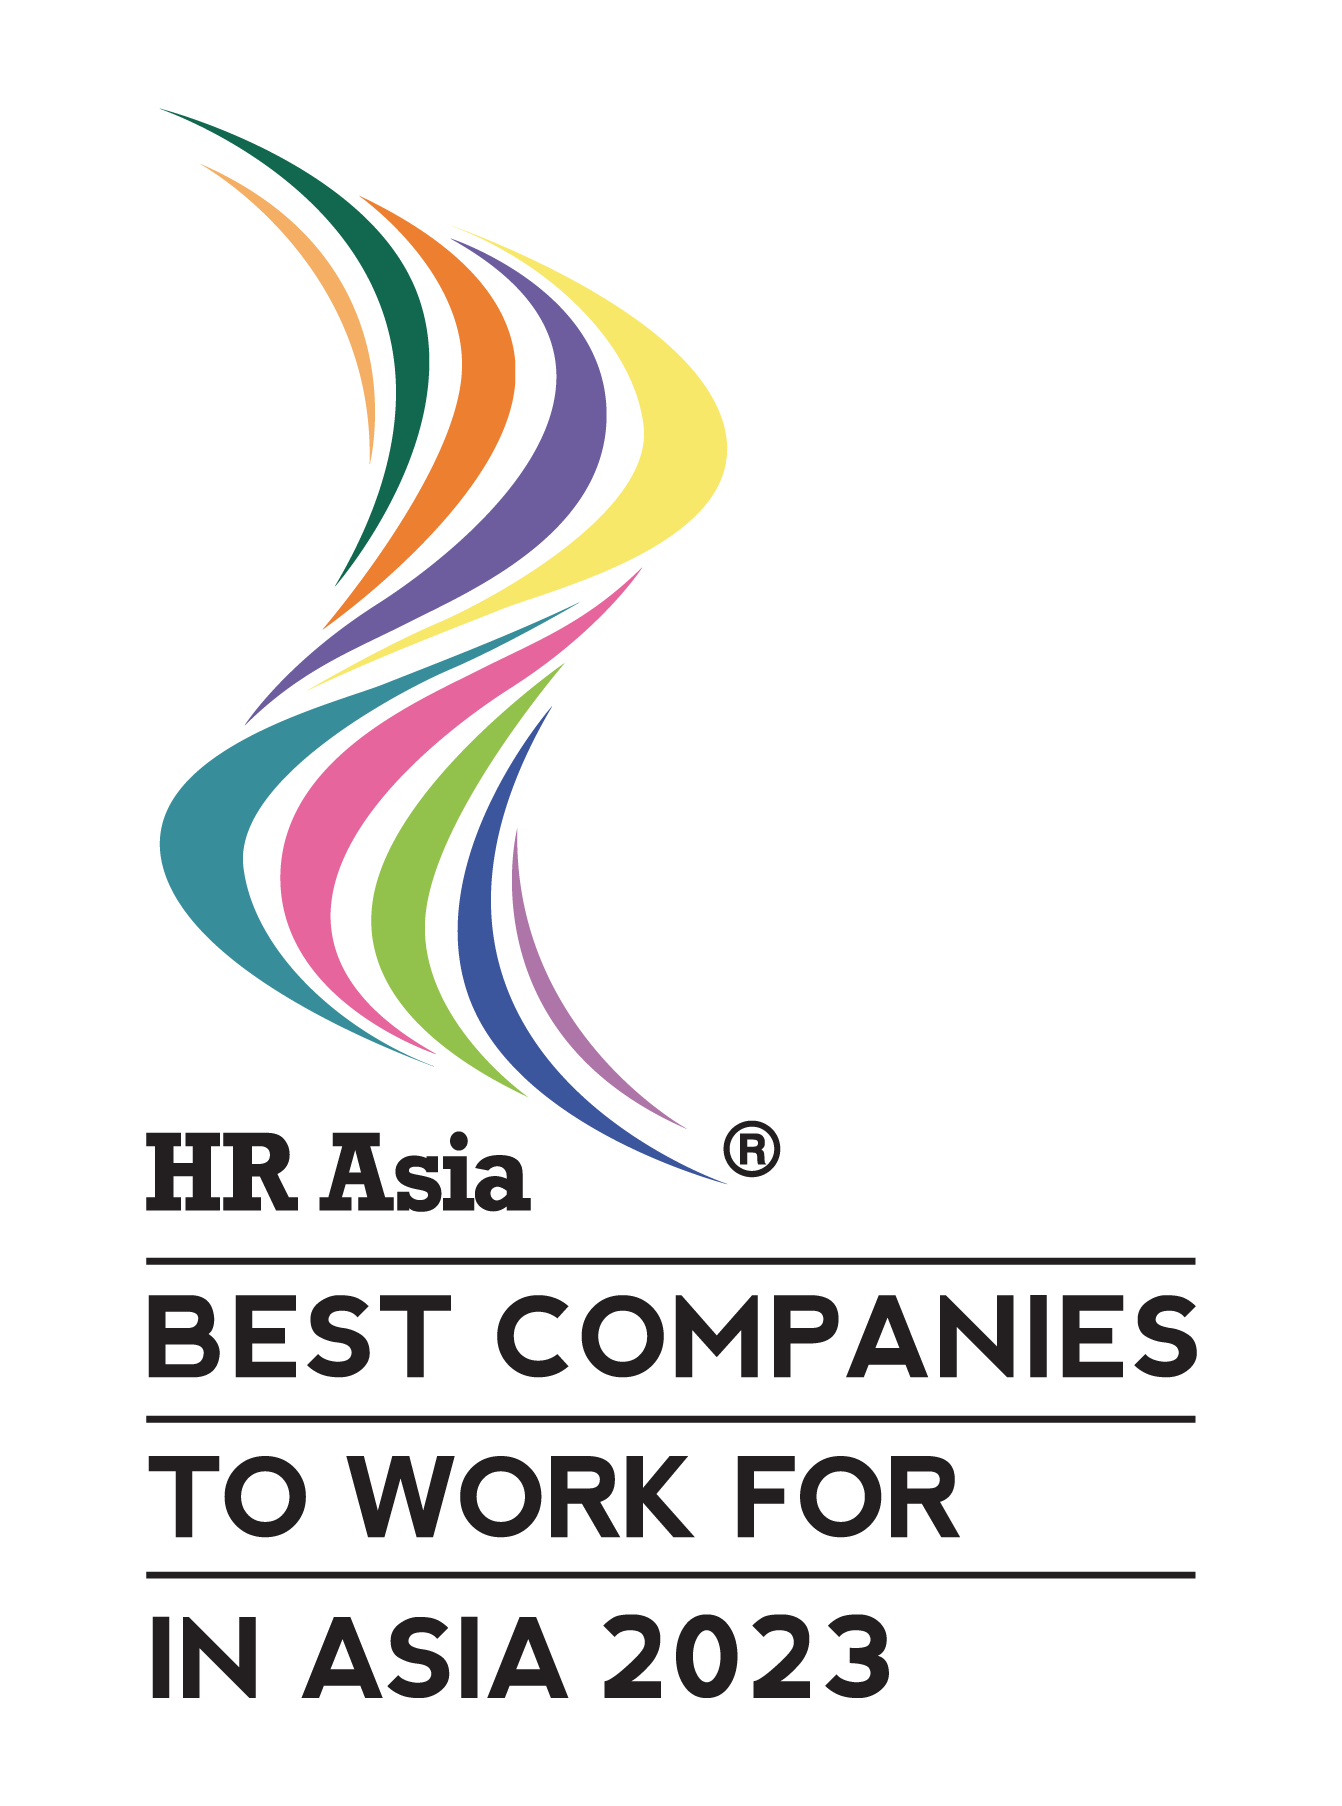 HR Asia Best Companies to Work for in Asia & DEI Awards 2023